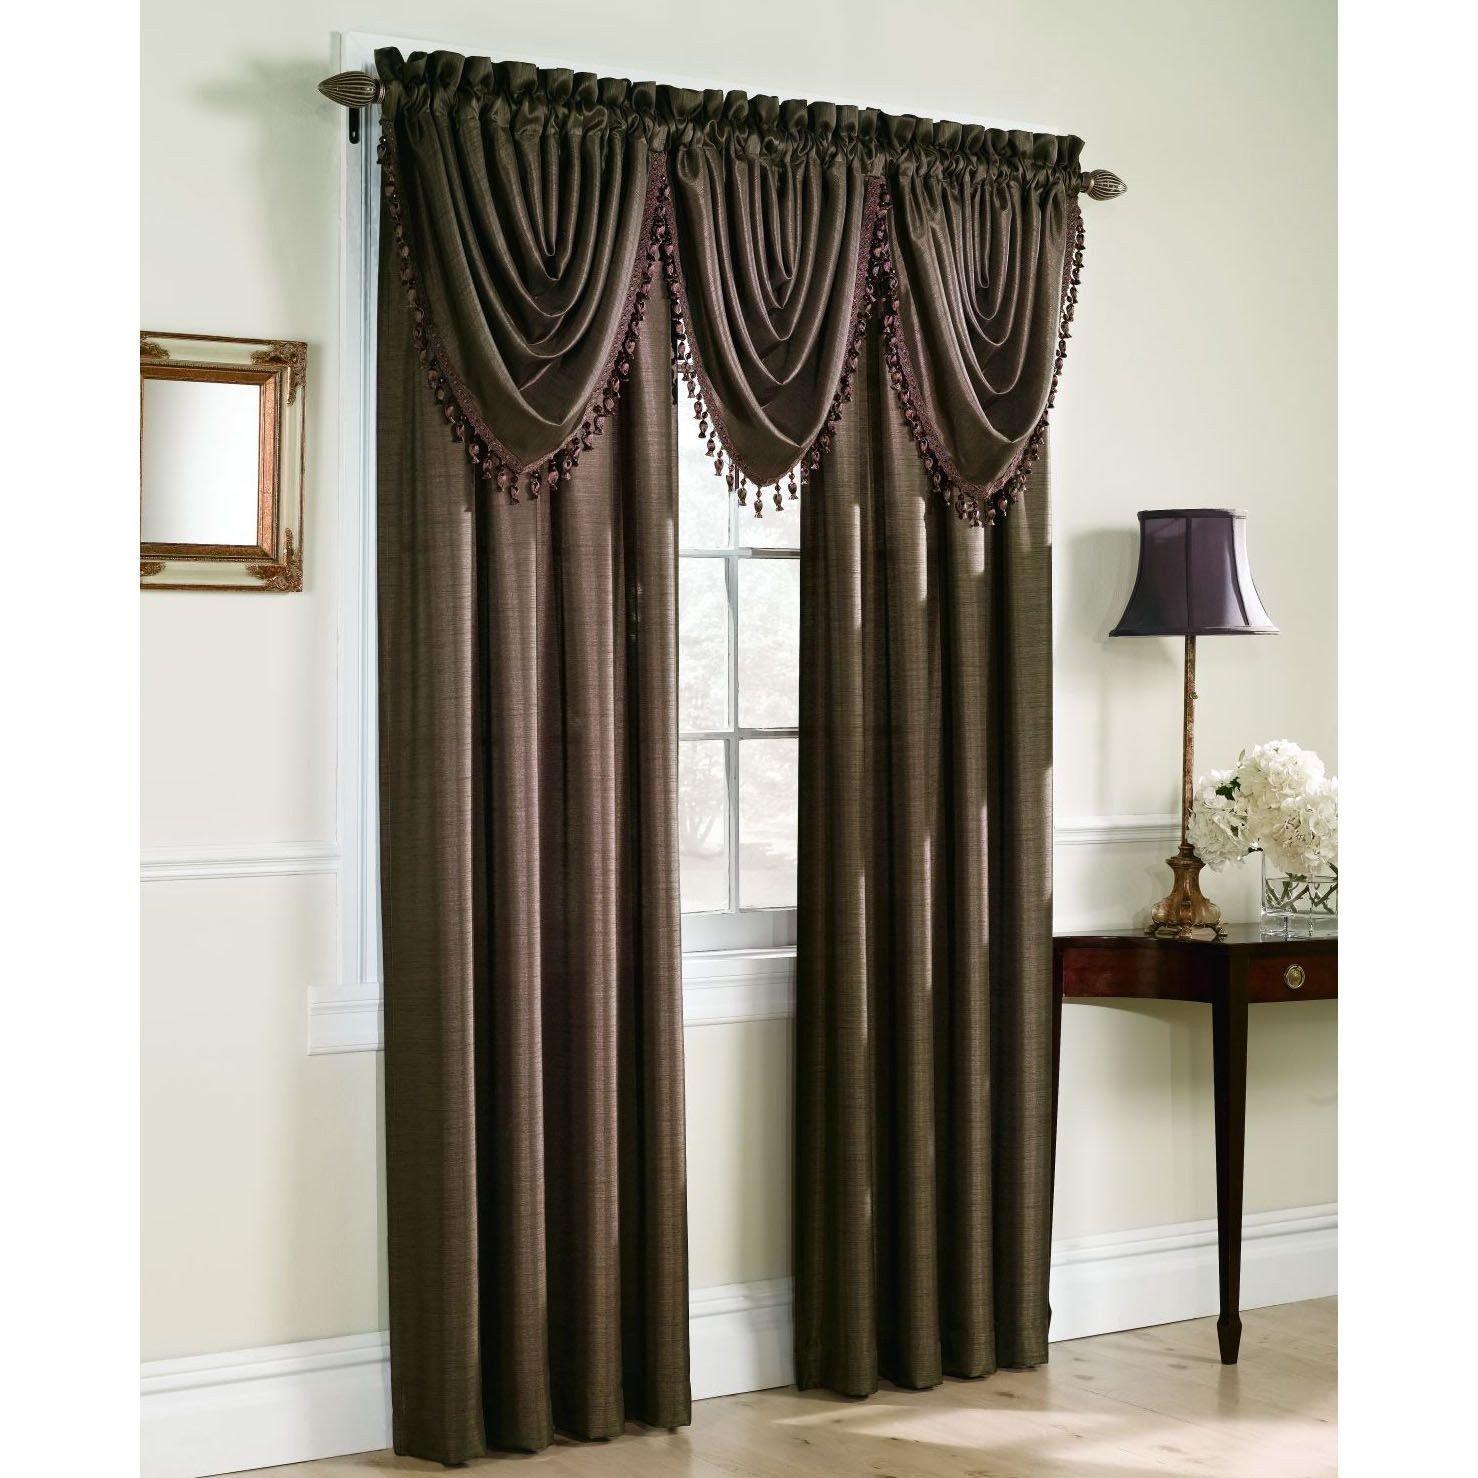 Sears Curtains For Living Room
 26 x 36 Window Valance Jewel Tone Elegance at Sears and Kmart